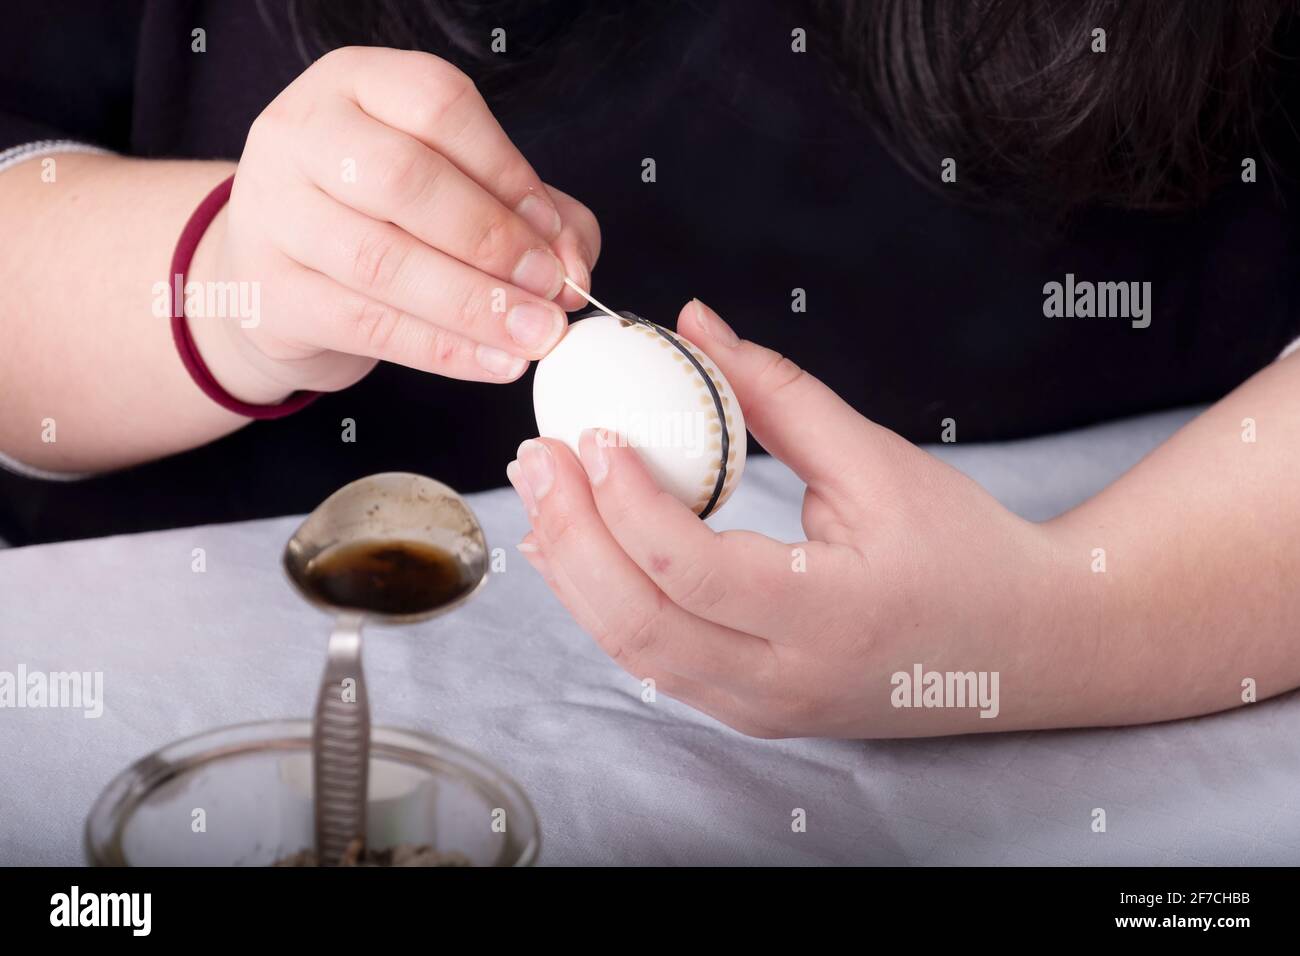 Female hands paints a white Easter egg according to german Sorbian tradition with a trimmed goose quill and melted bees wax along a rubber ring Stock Photo